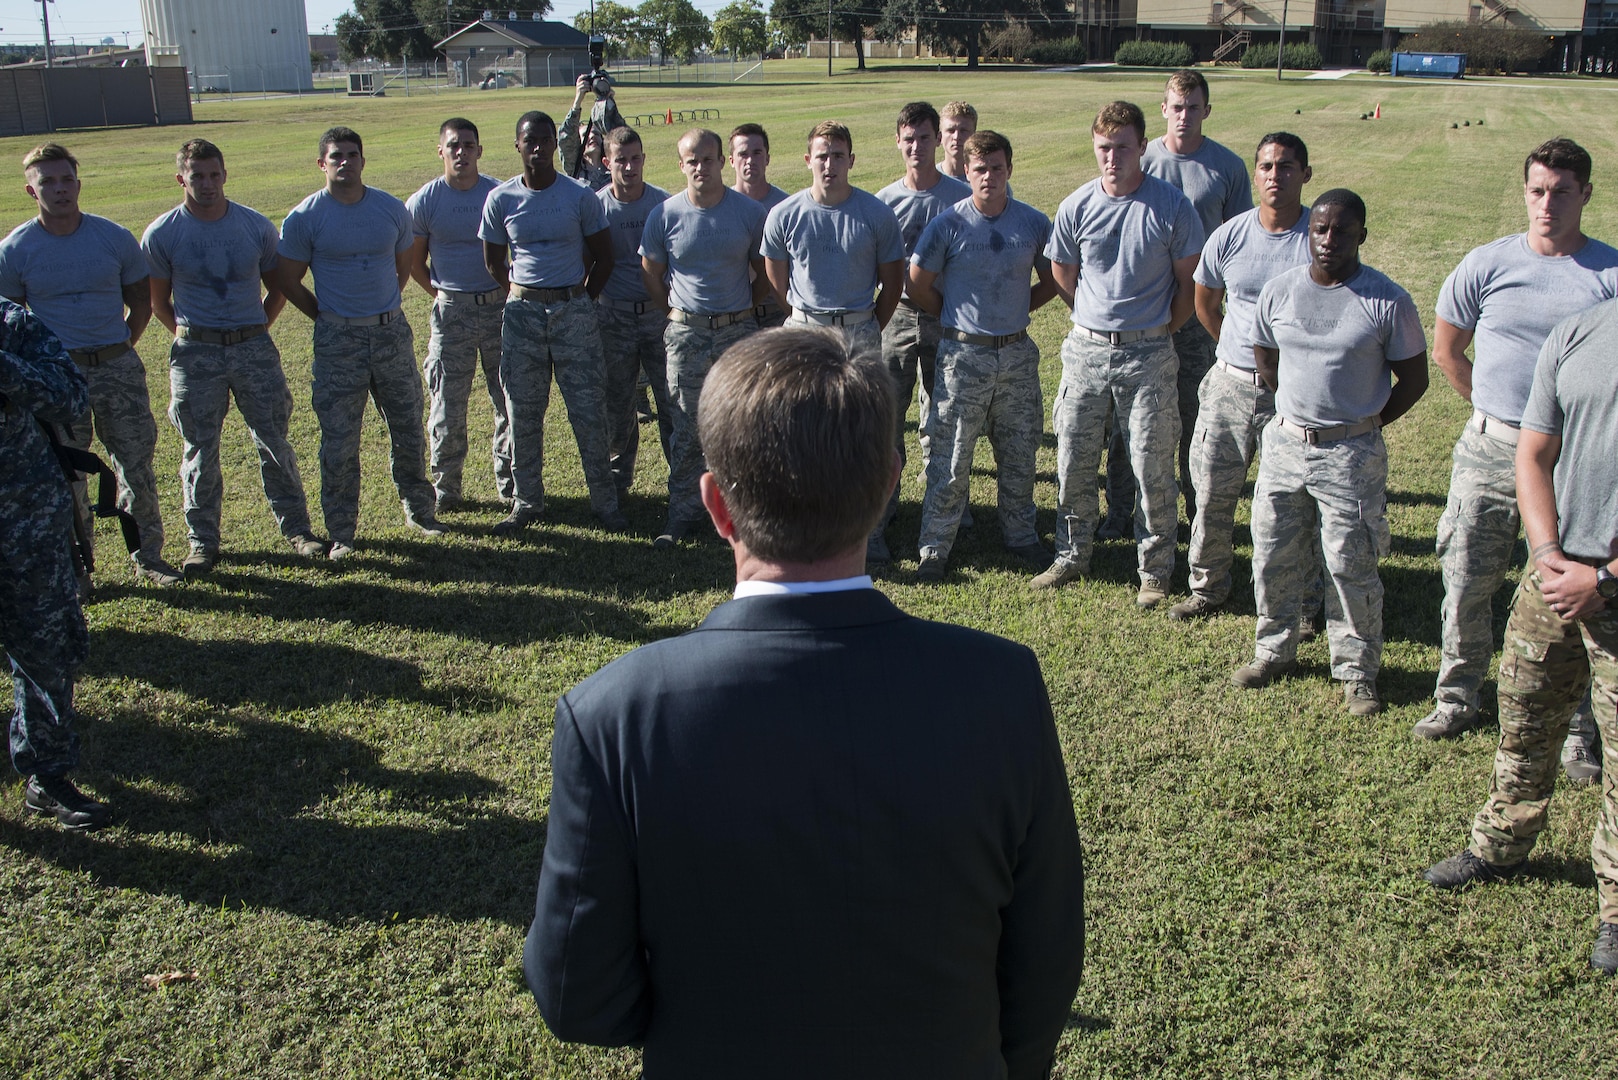 Defense Secretary Ash Carter speaks to U.S. Air Force battlefield airman trainees during his visit to Joint Base San Antonio-Lackland, Nov. 16, 2016.  Carter is on a four-day trip focusing on the readiness of the nation’s force and the effectiveness of the warfighter’s training and equipment.  (U.S. Air Force photo by Sean M. Worrell/Not Released)